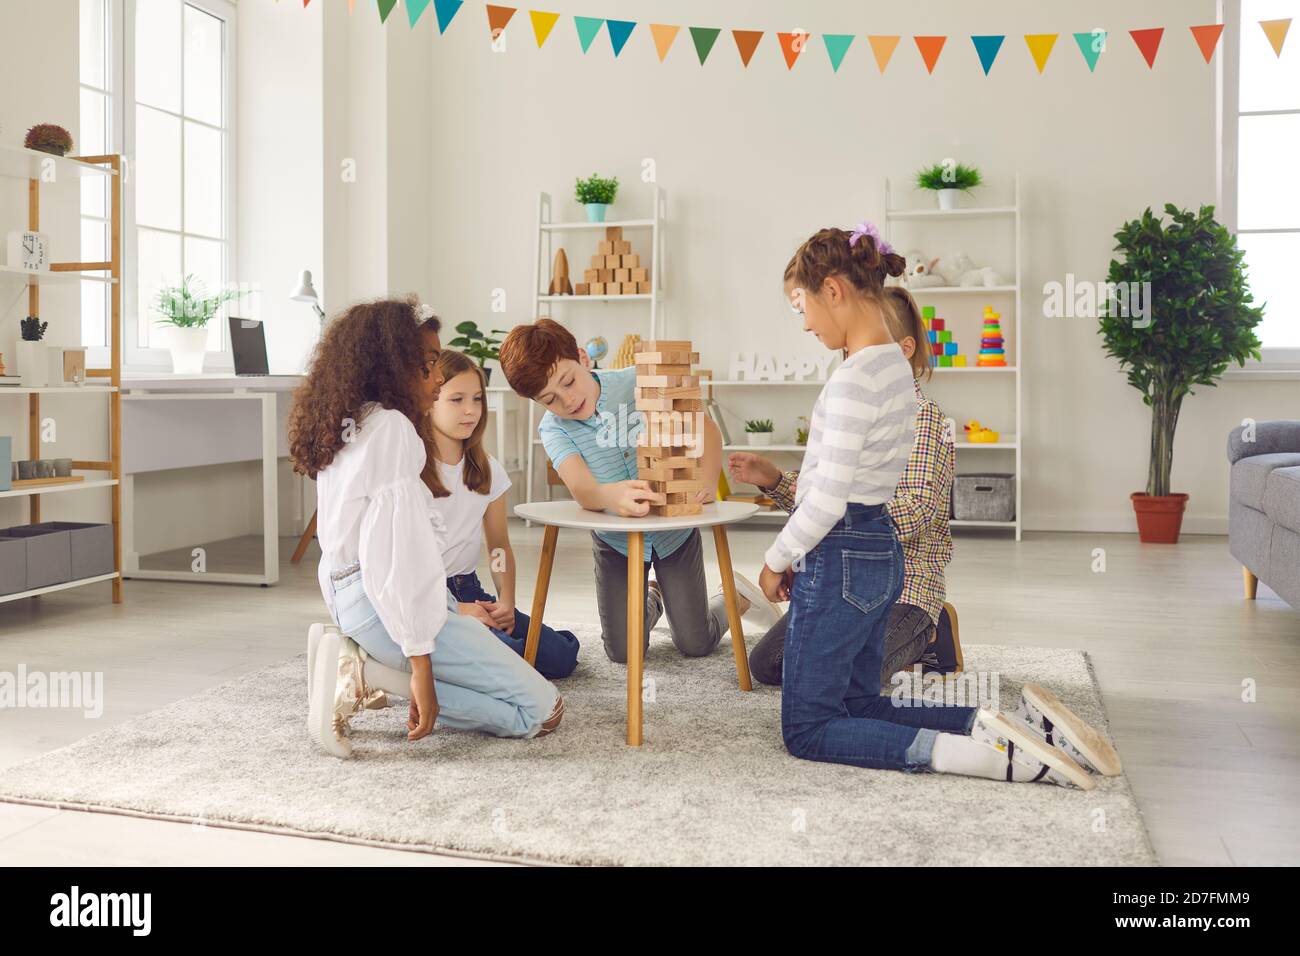 Group of diverse children sitting on floor and playing board game with wooden blocks at home. Stock Photo